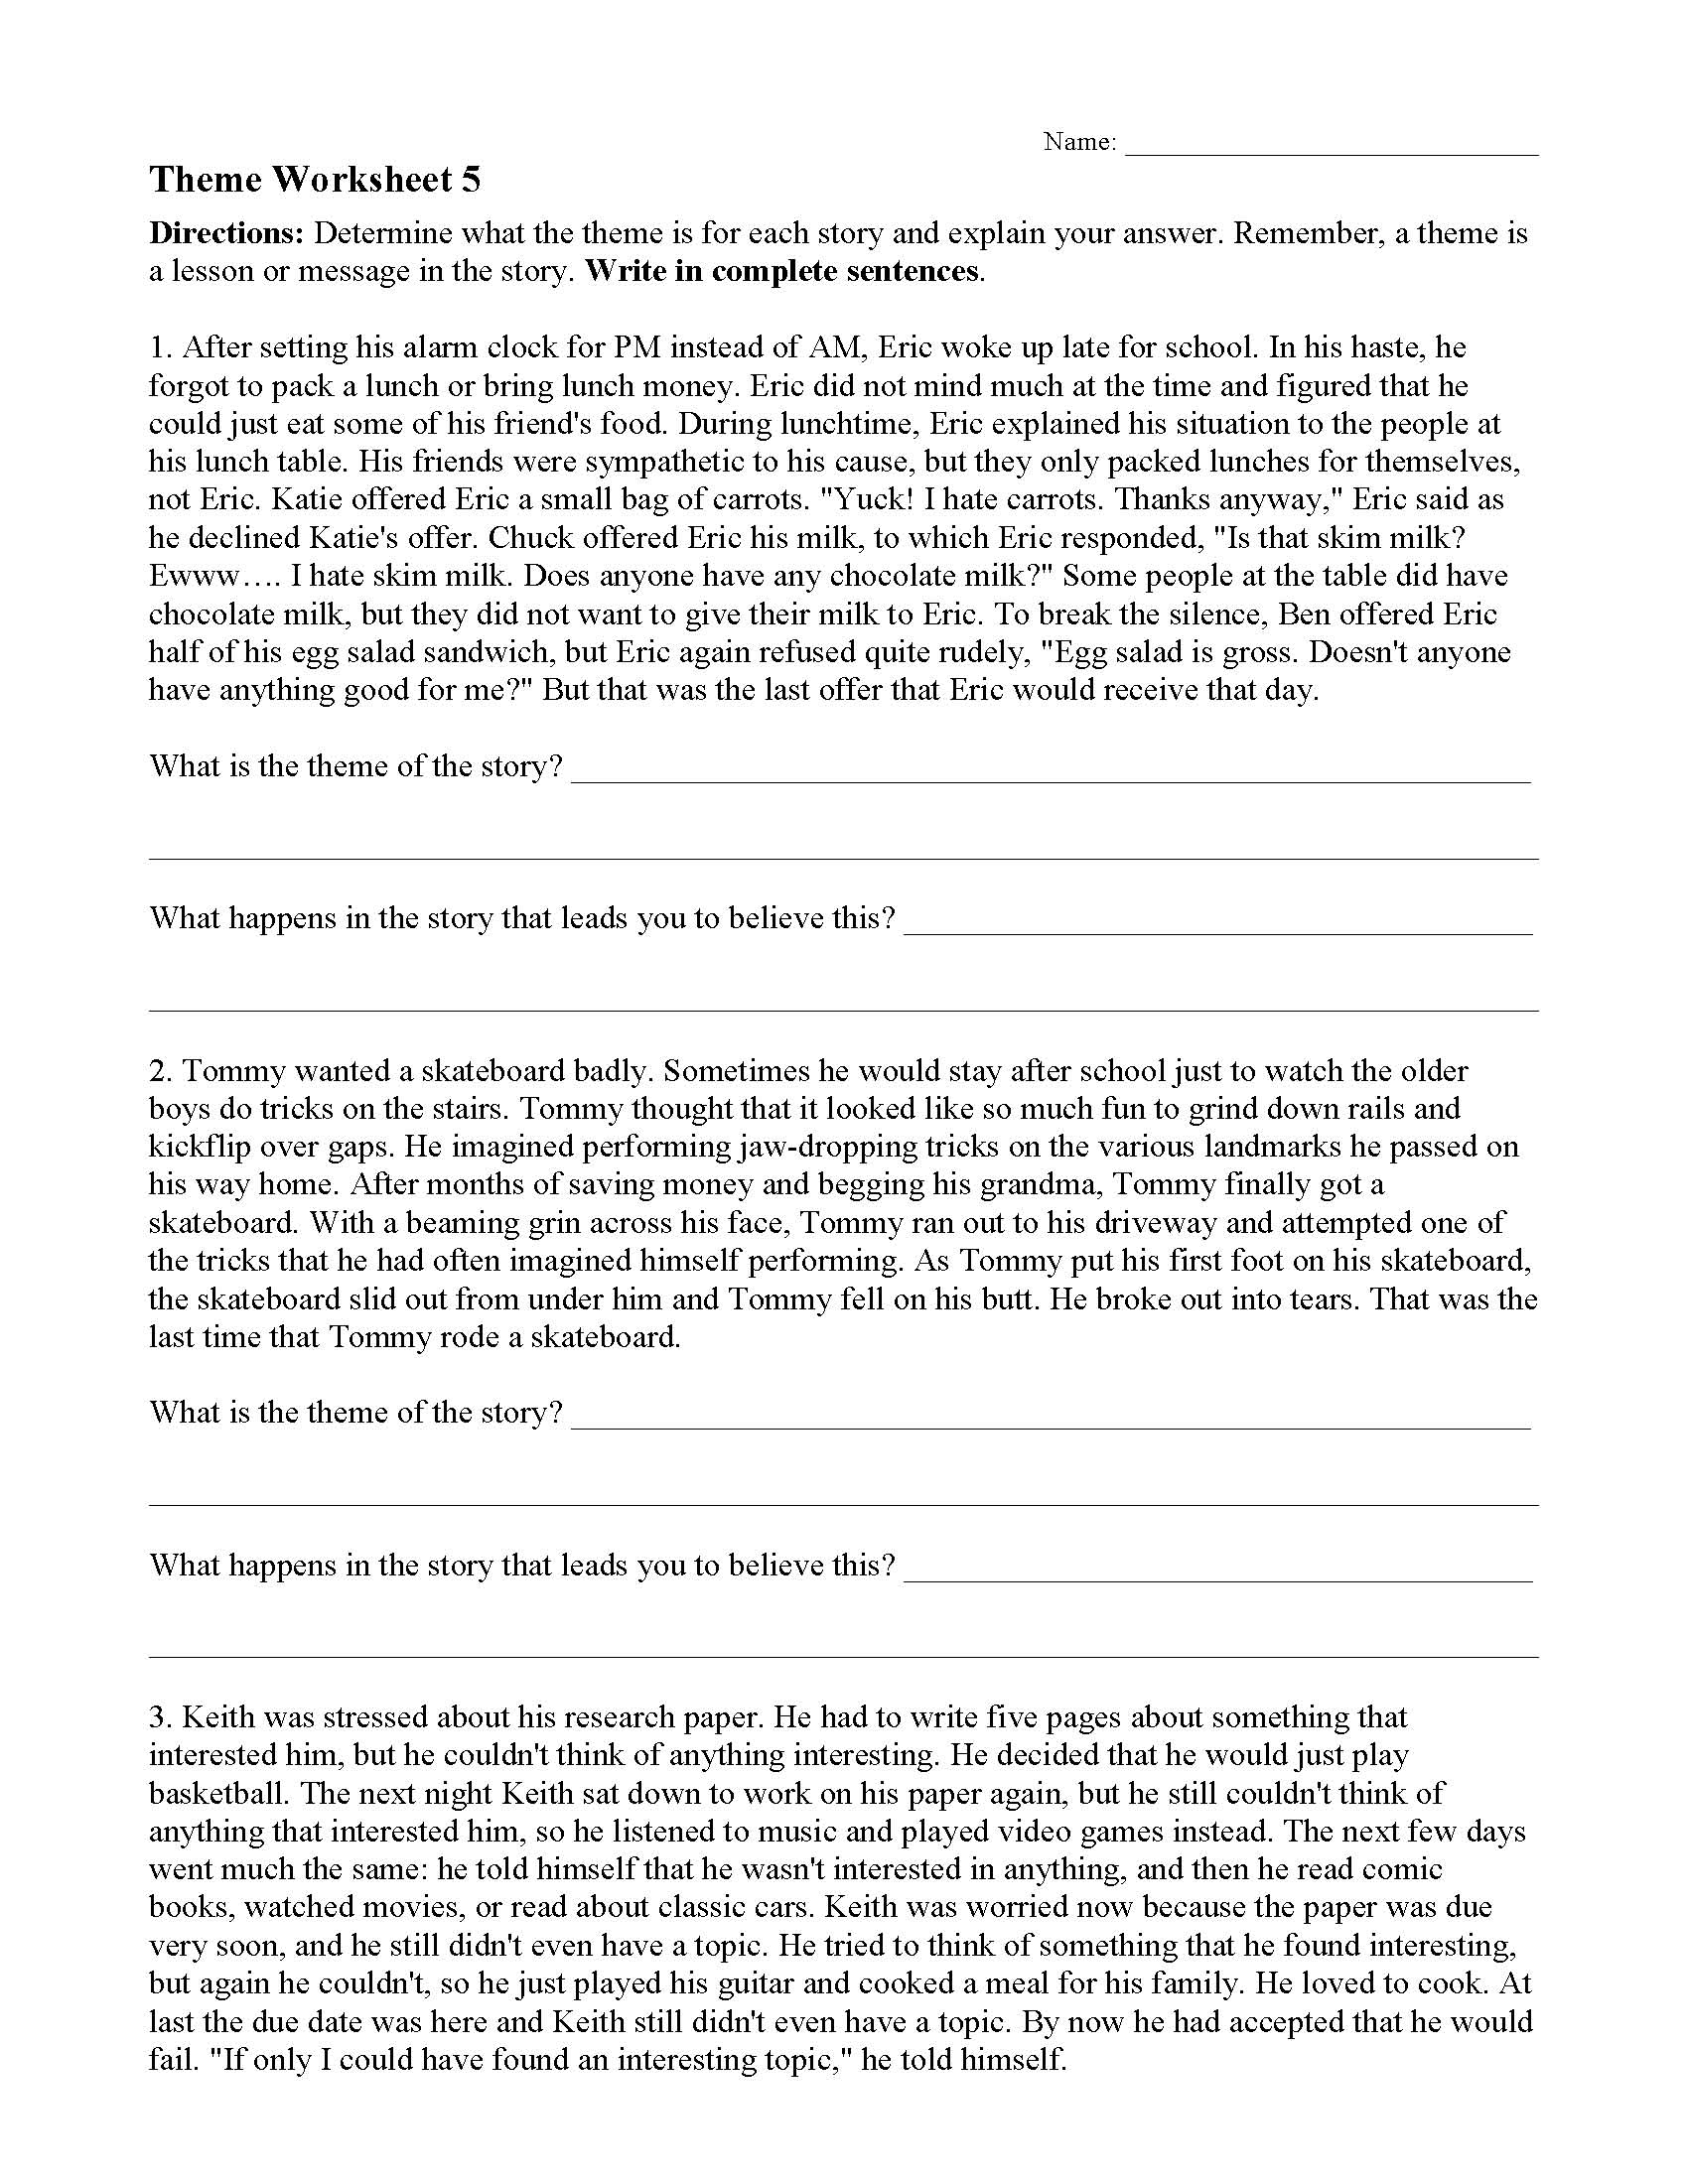 Story Theme Worksheets Multiple Choice